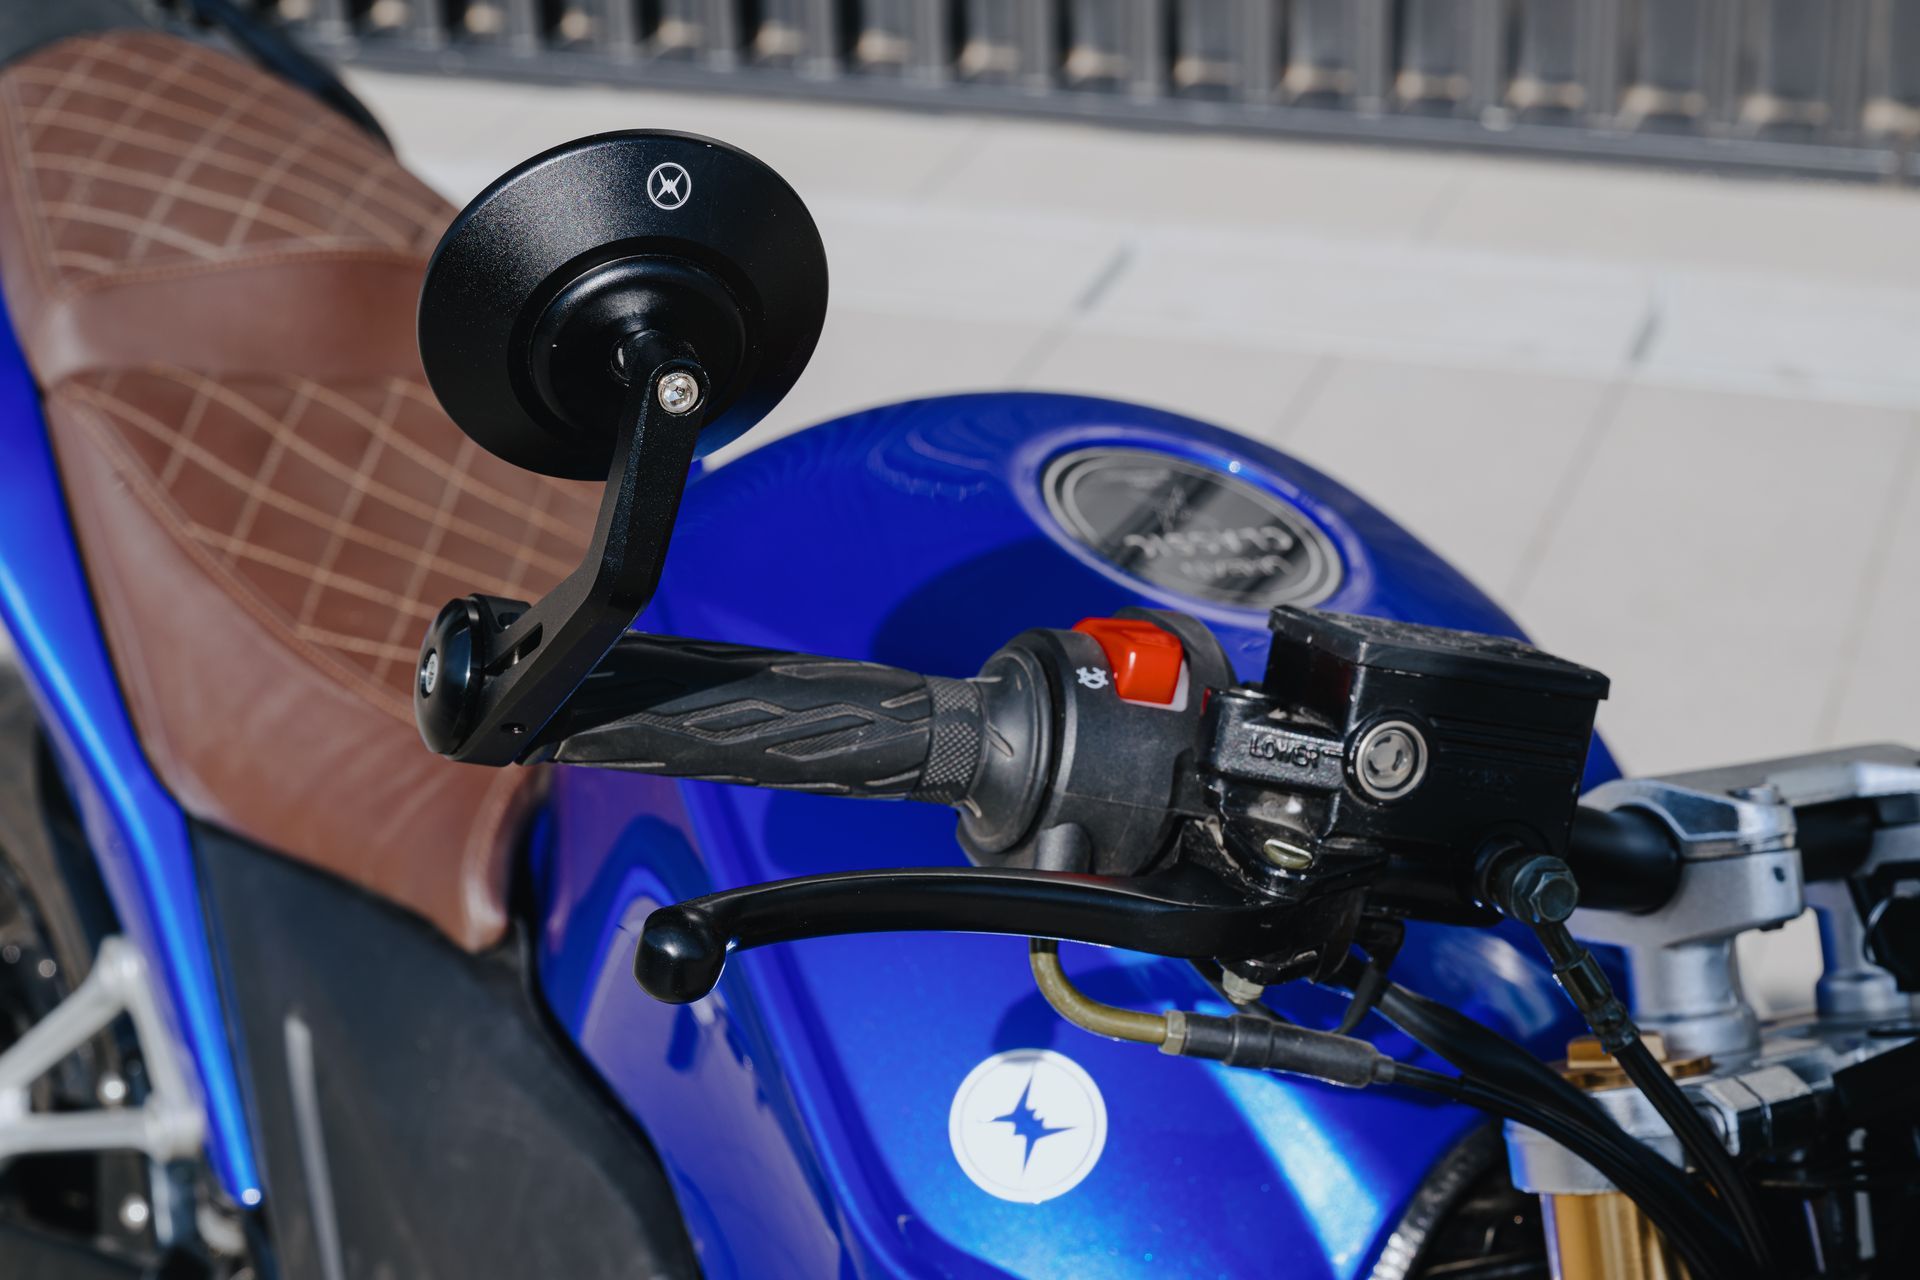 A close-up of a blue electric motorcycle with a brown seat. Urban Classic 2022 Vienna